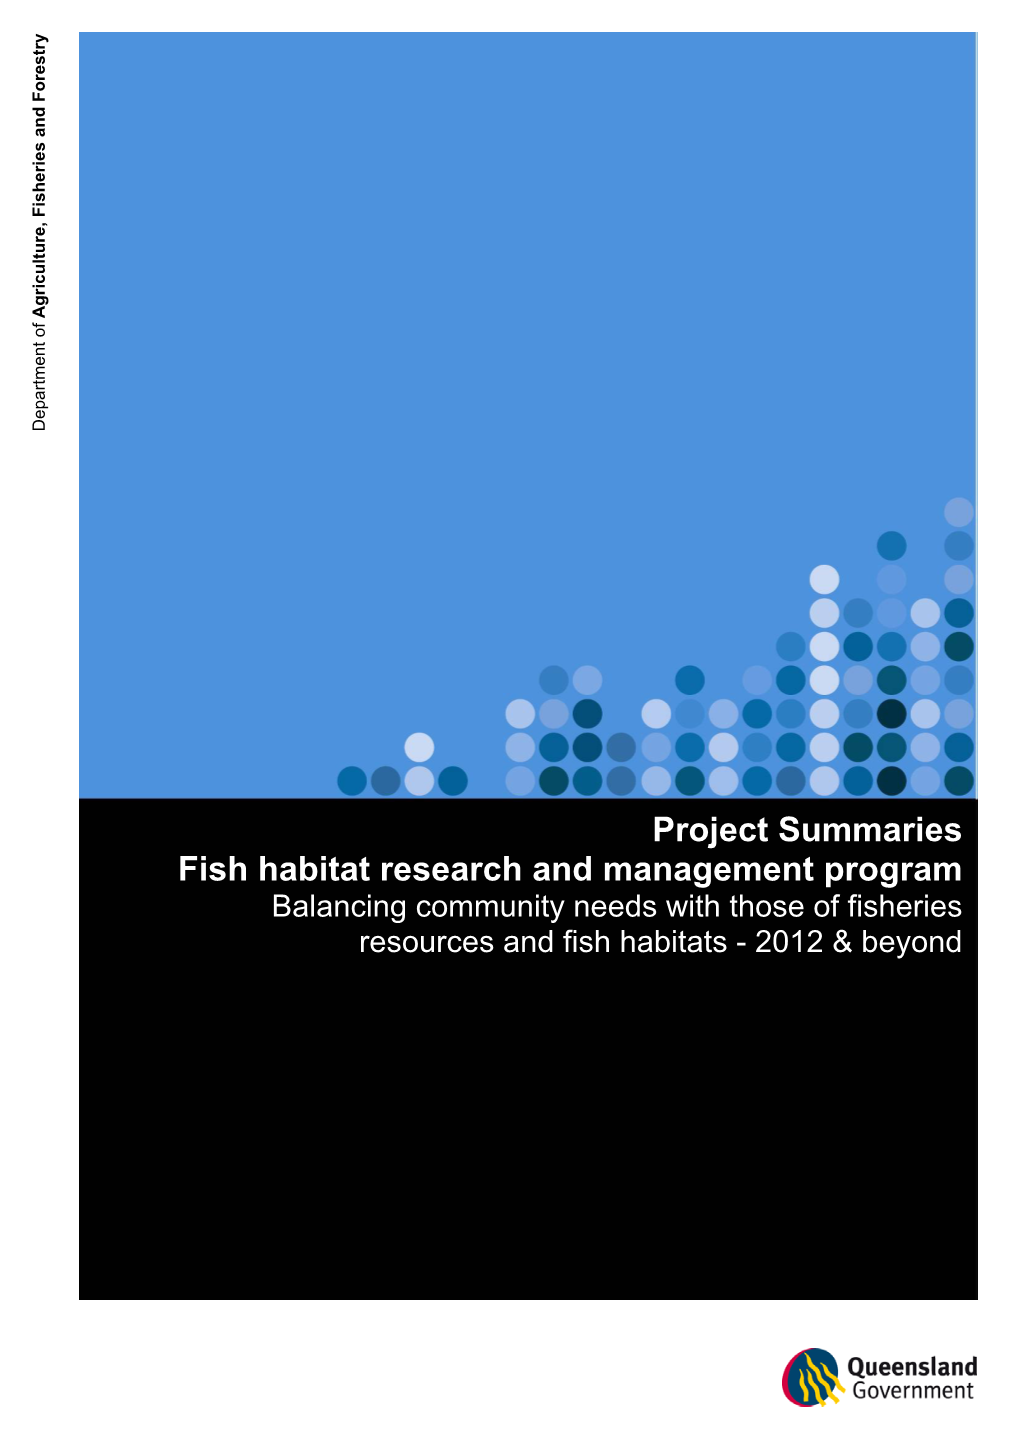 Project Summaries Fish Habitat Research and Management Program Balancing Community Needs with Those of Fisheries Resources and Fish Habitats - 2012 & Beyond